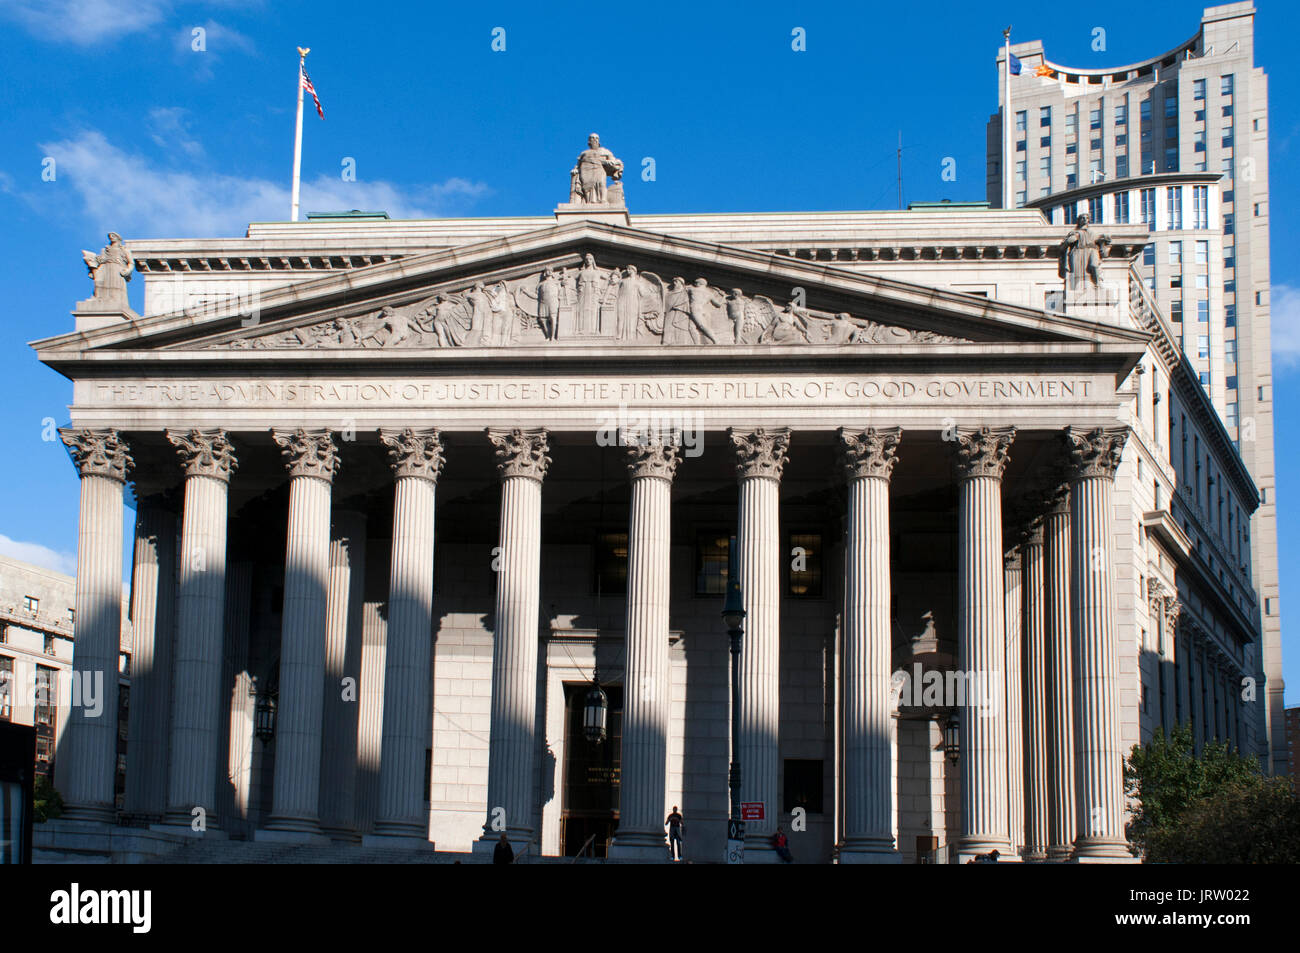 New York State Supreme Court building in Lower Manhattan showing the words 'The True Administration of Justice' on its facade in Manhattan, New York,  Stock Photo